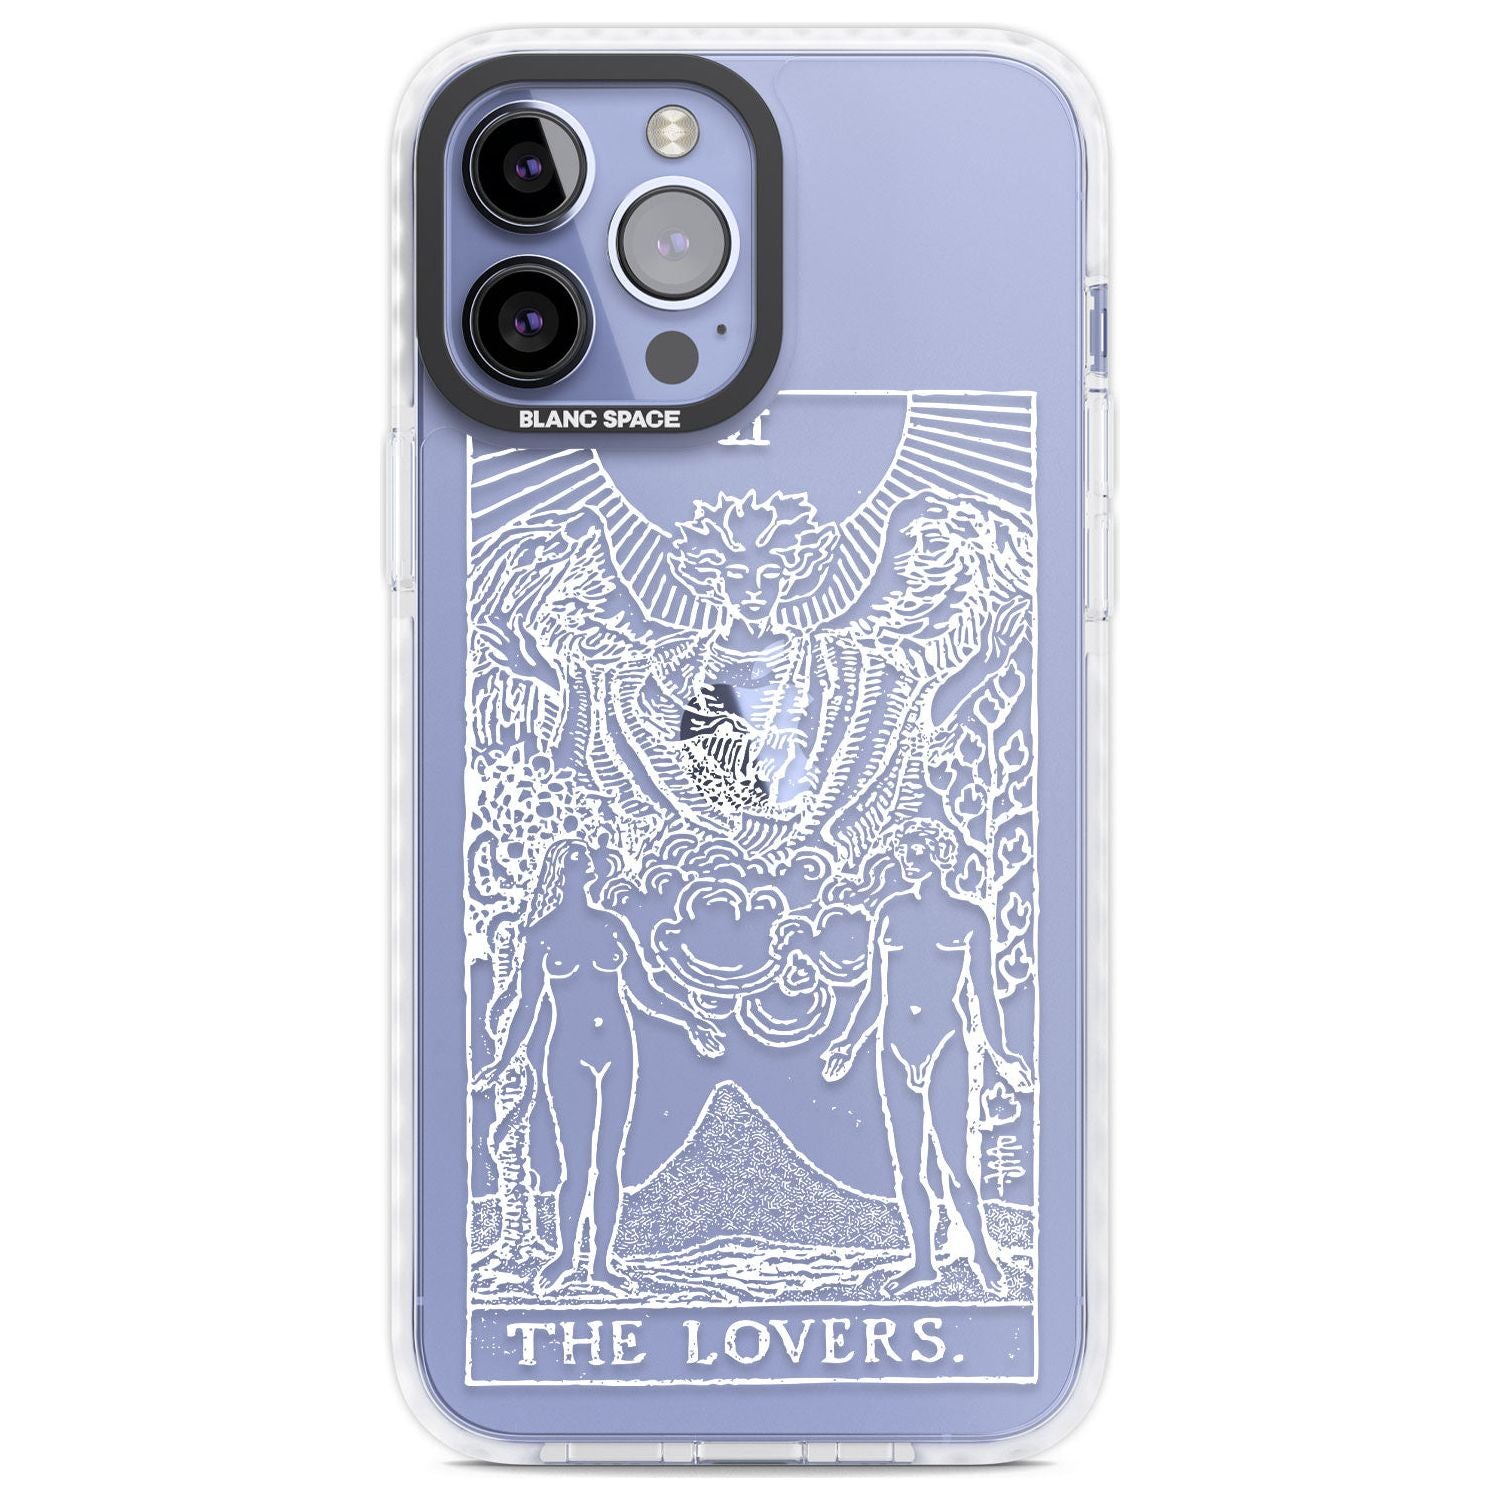 Personalised The Lovers Tarot Card - White Transparent Custom Phone Case iPhone 13 Pro Max / Impact Case,iPhone 14 Pro Max / Impact Case Blanc Space